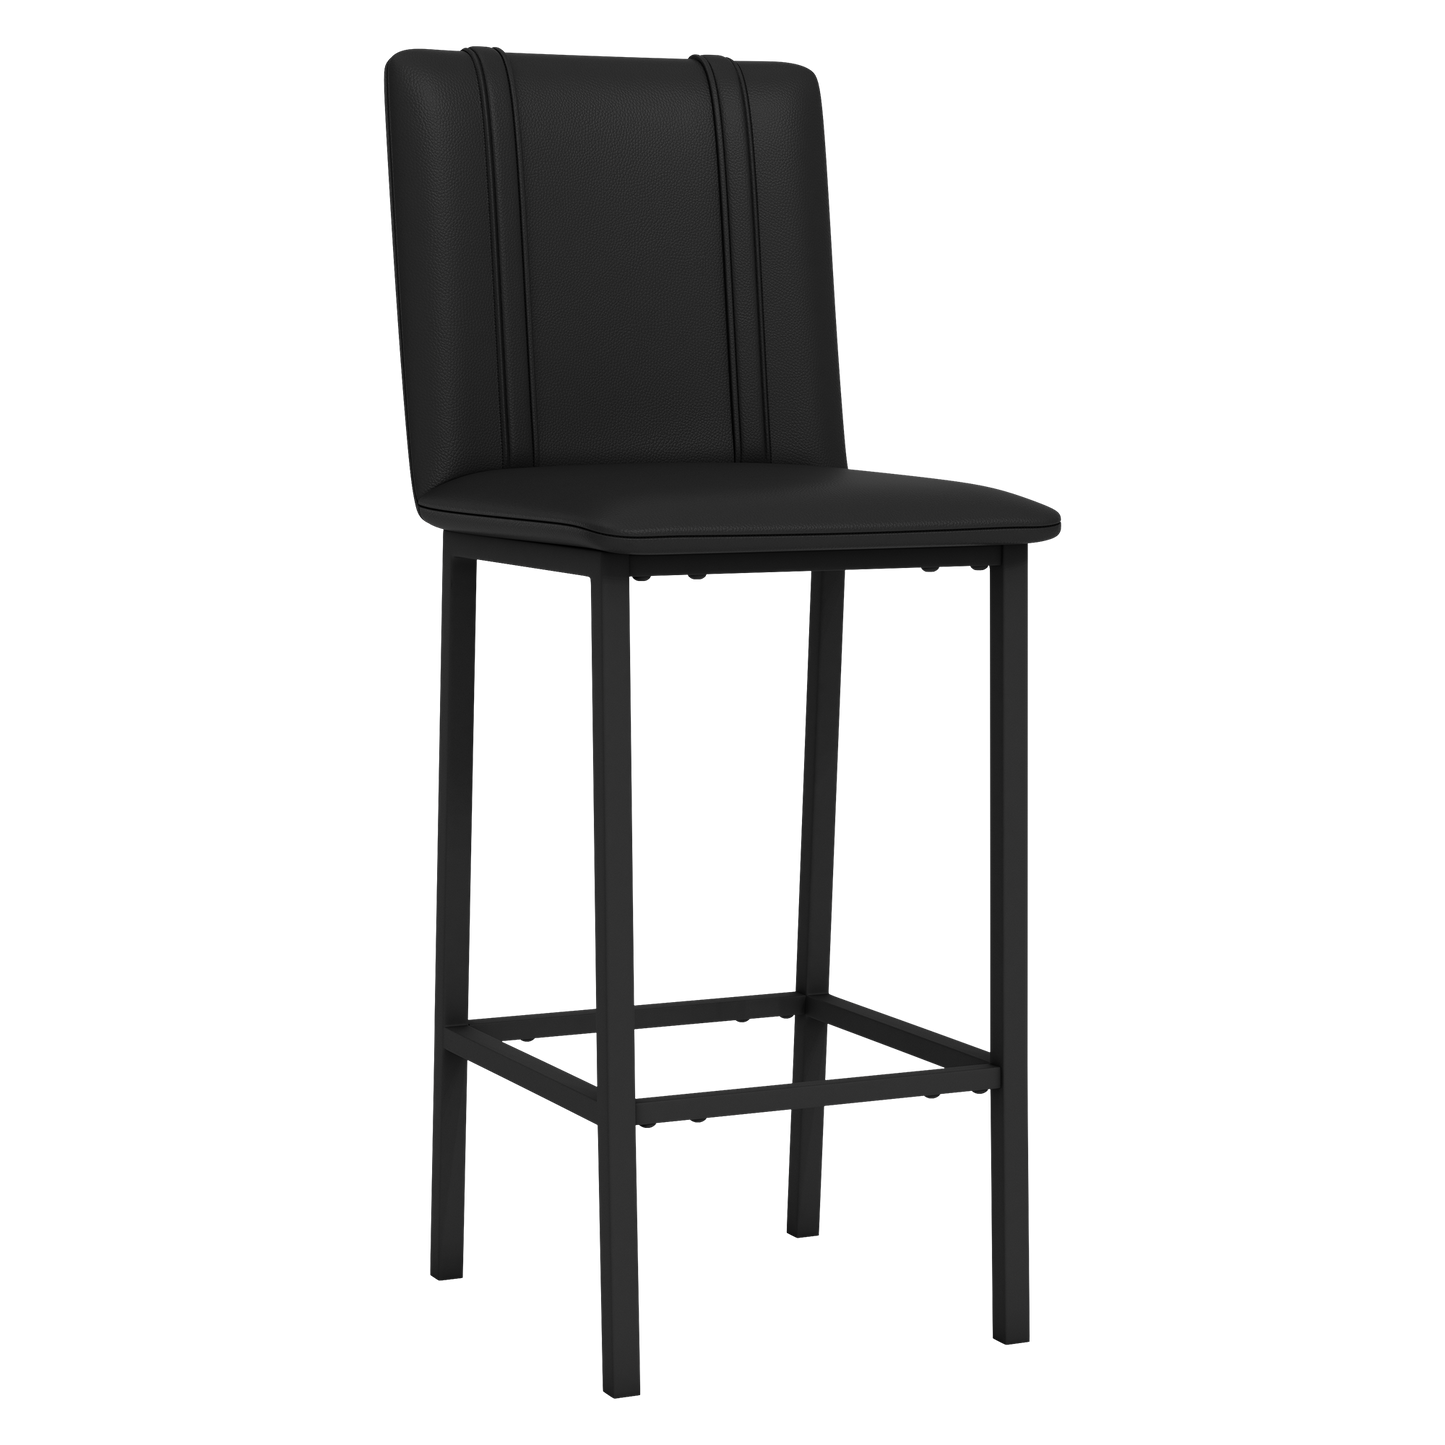 Bar Stool 500 with Baltimore Orioles Cooperstown Primary Set of 2